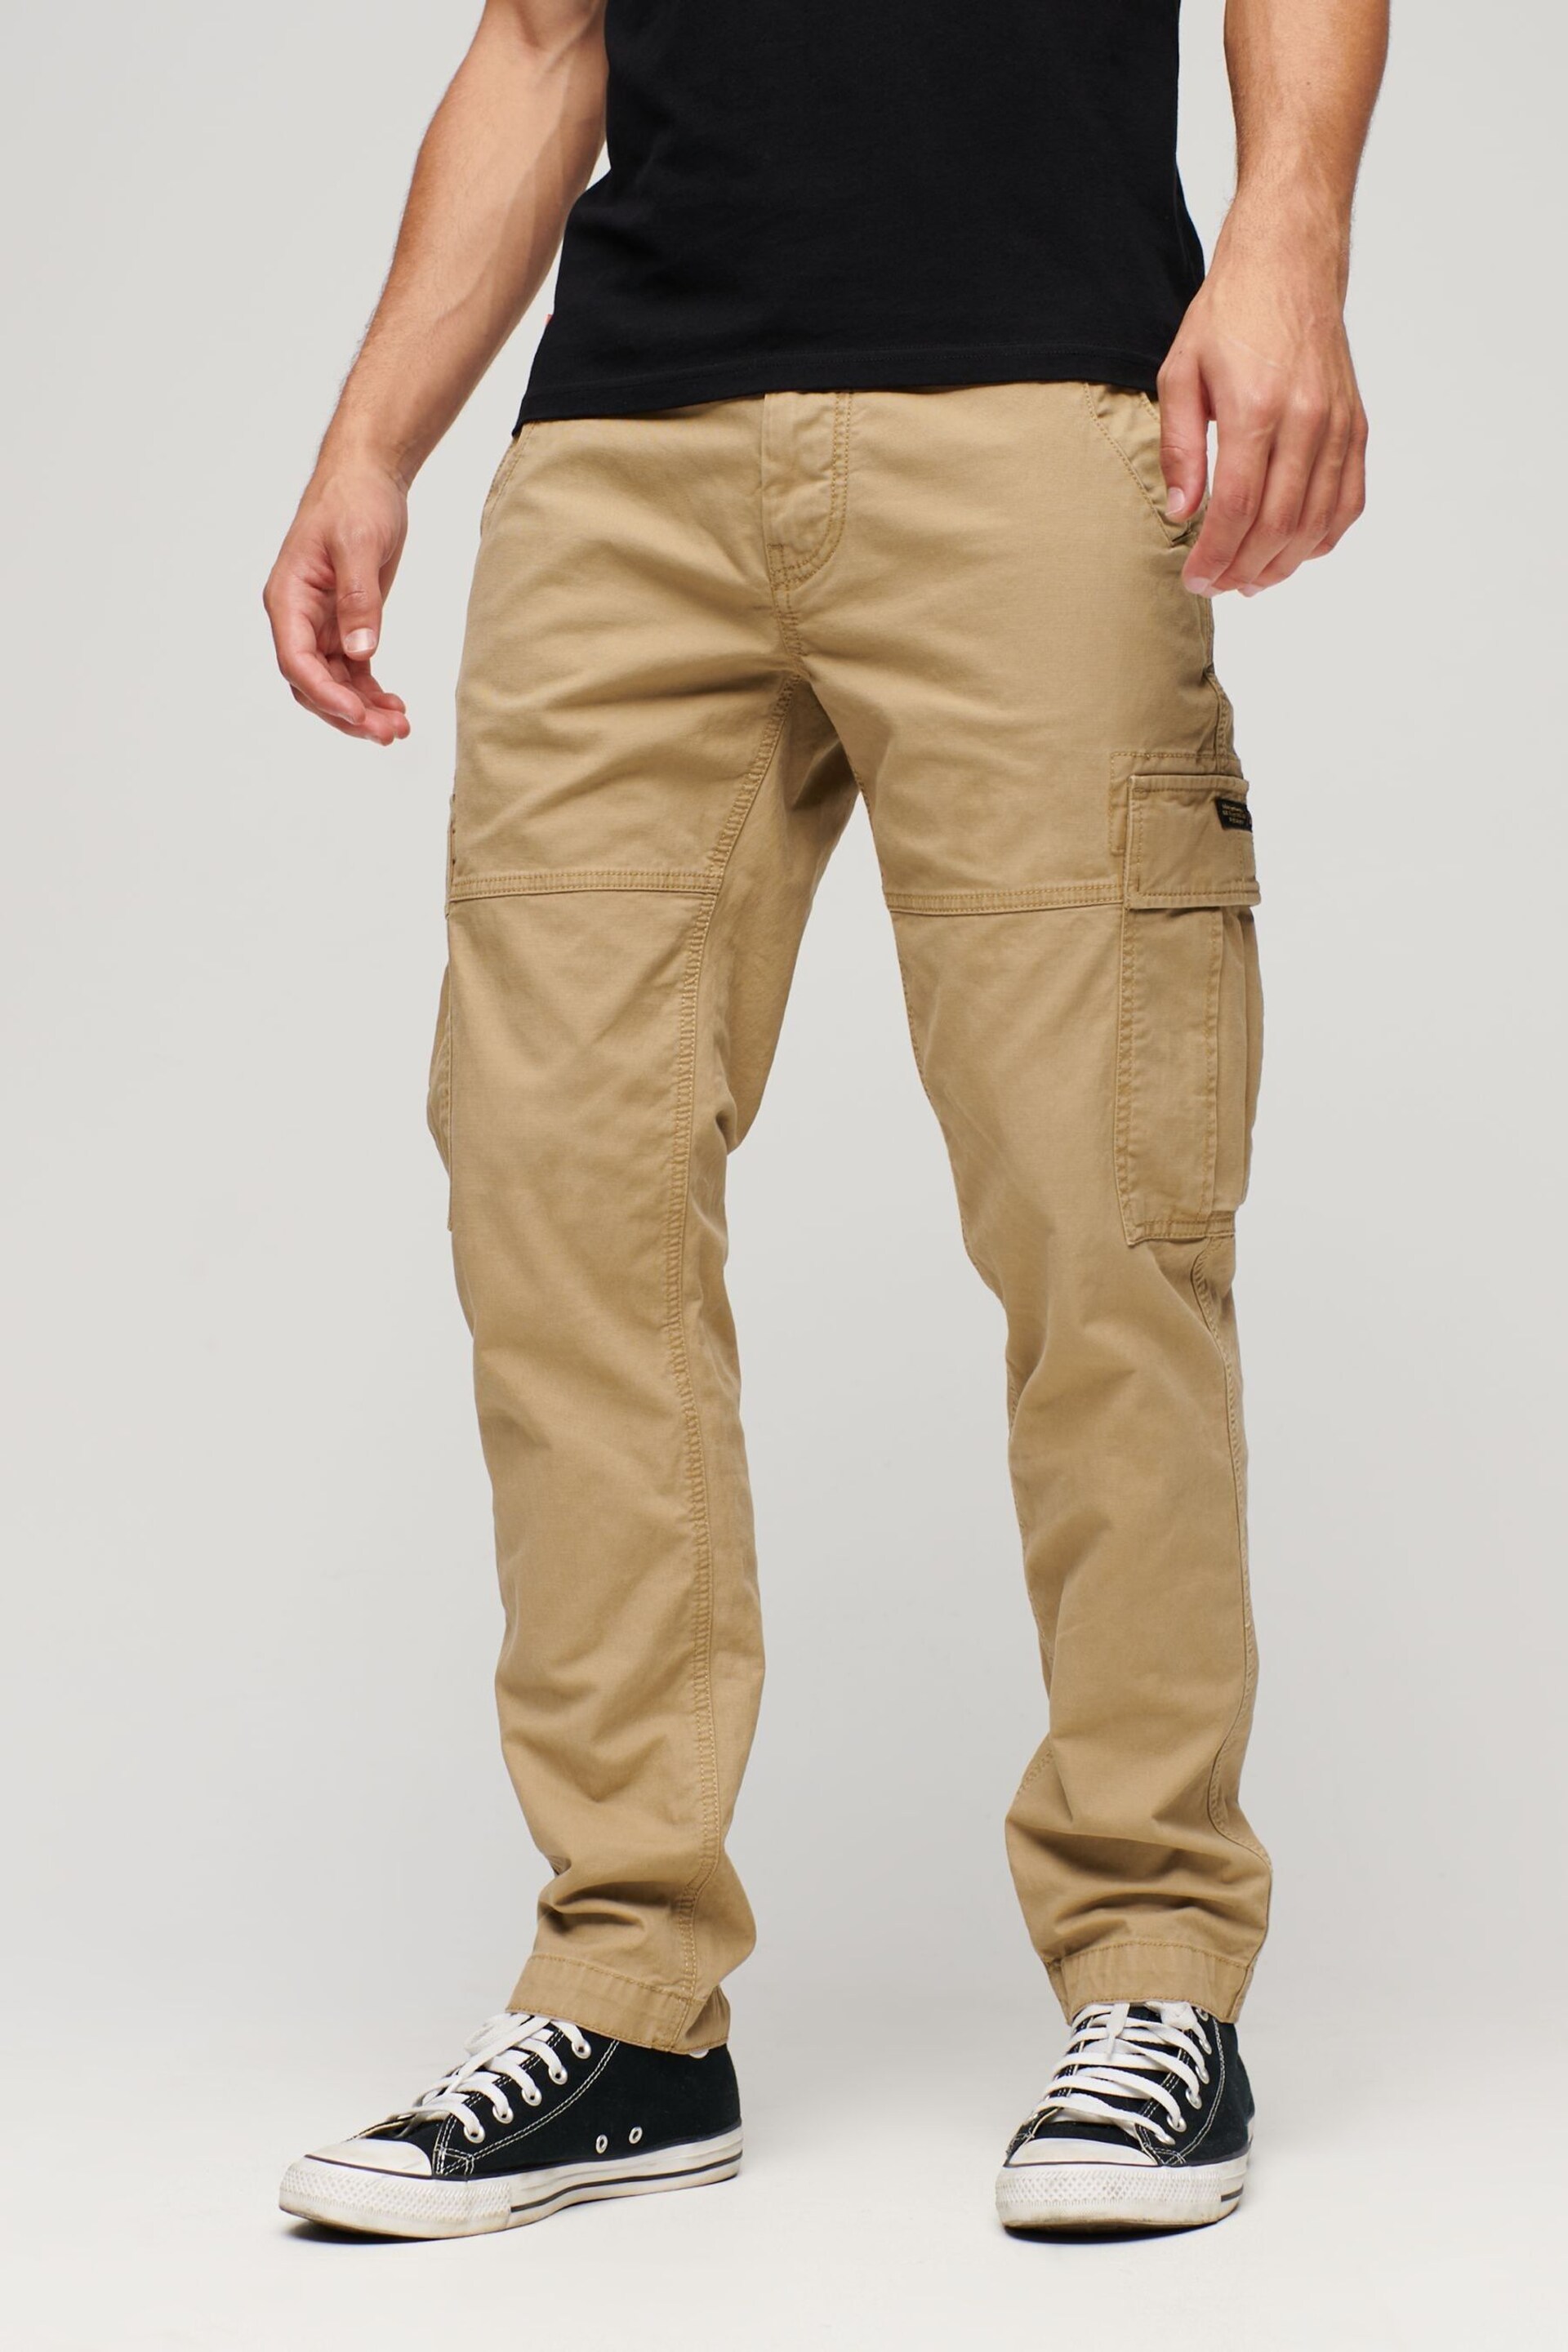 Superdry Cream Core Cargo Trousers - Image 1 of 9